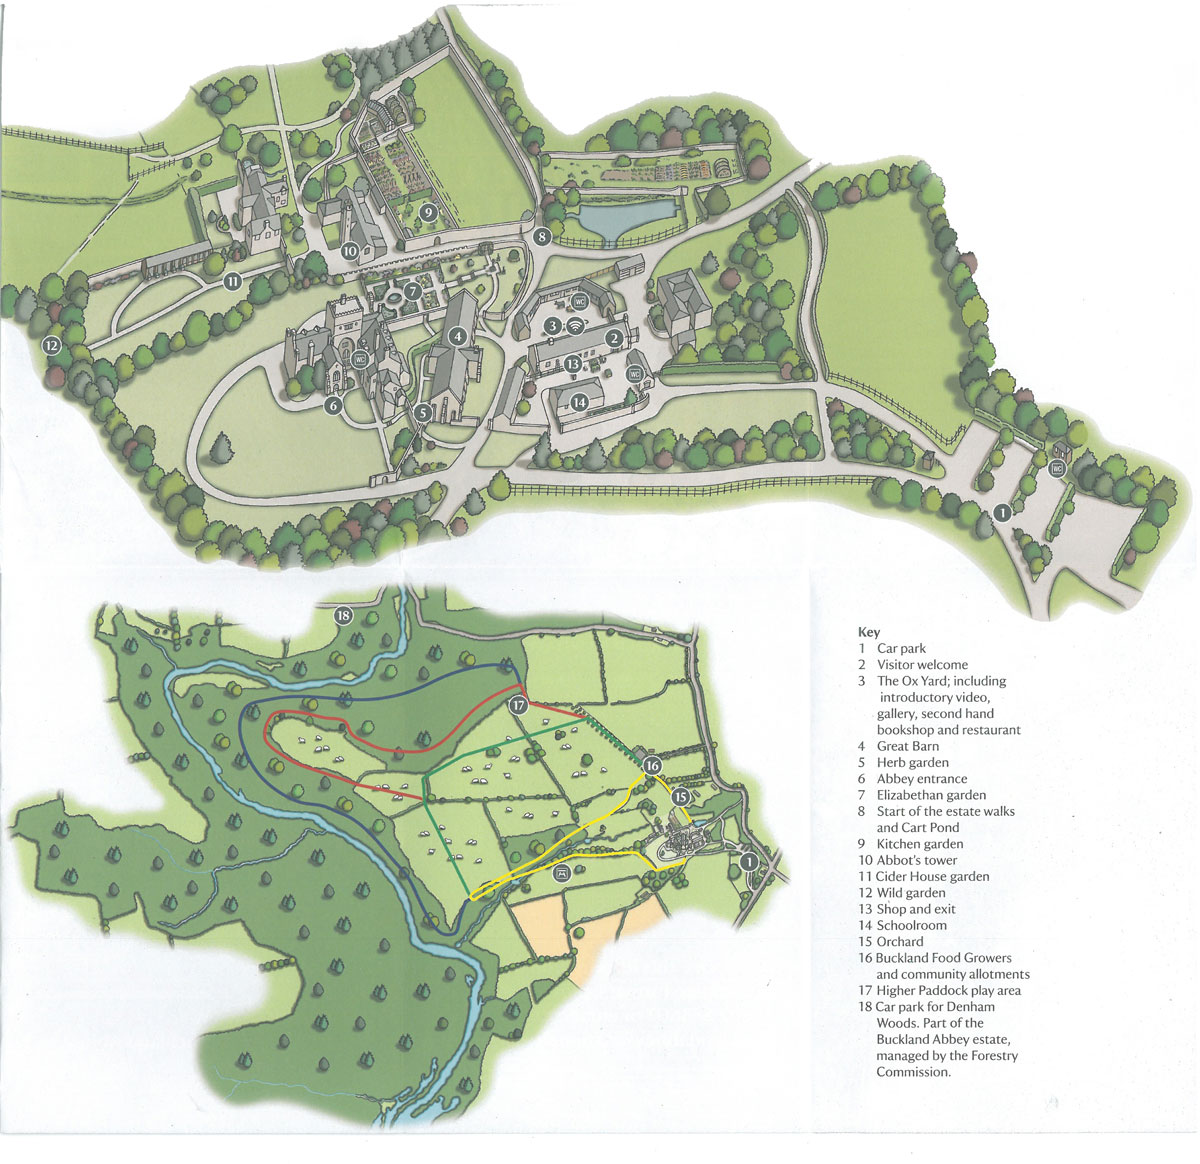 Plan of Buckland Abbey’s Gardens; and a Map of the Walks across the landscape of the Estate. Key to Estate Walks: YELLOW= Abbots Walk, 1 mile. GREEN=Grenville Walk, 1 ½ miles. RED=Drake Walk, 2 ½ miles. BLUE=Amicia Walk, 3 miles 